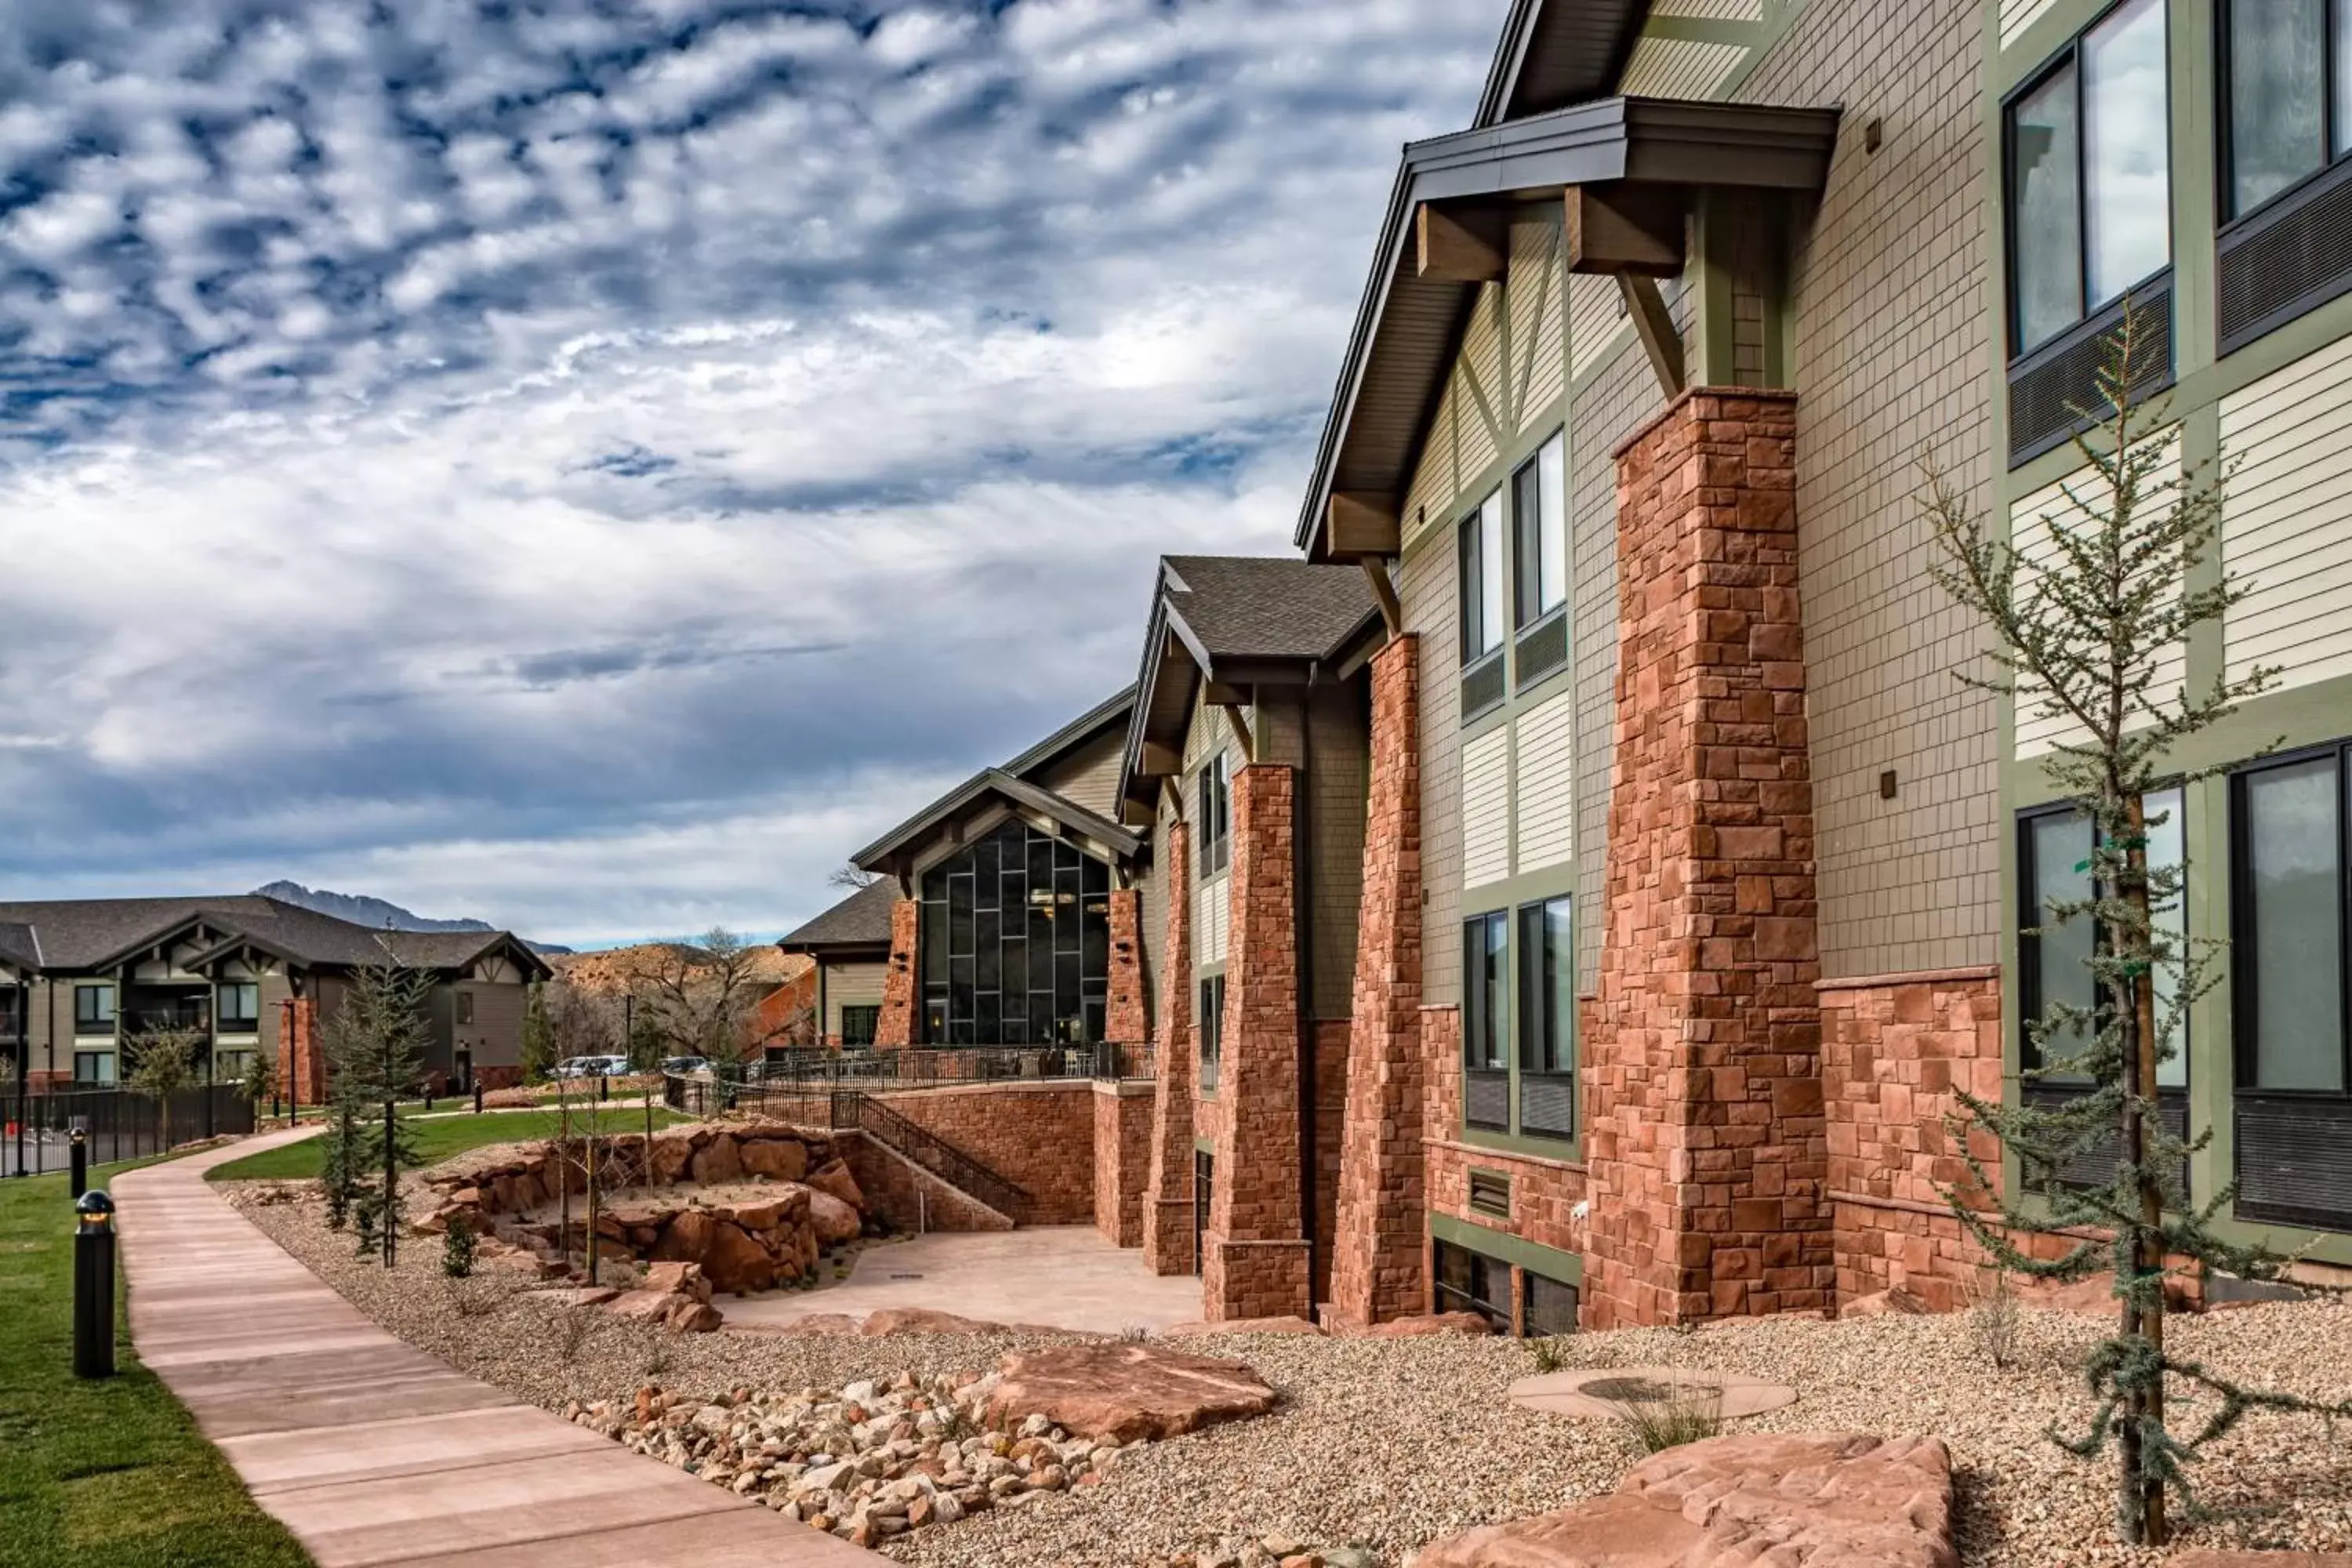 Meeting/conference room, Property Building in SpringHill Suites by Marriott Springdale Zion National Park